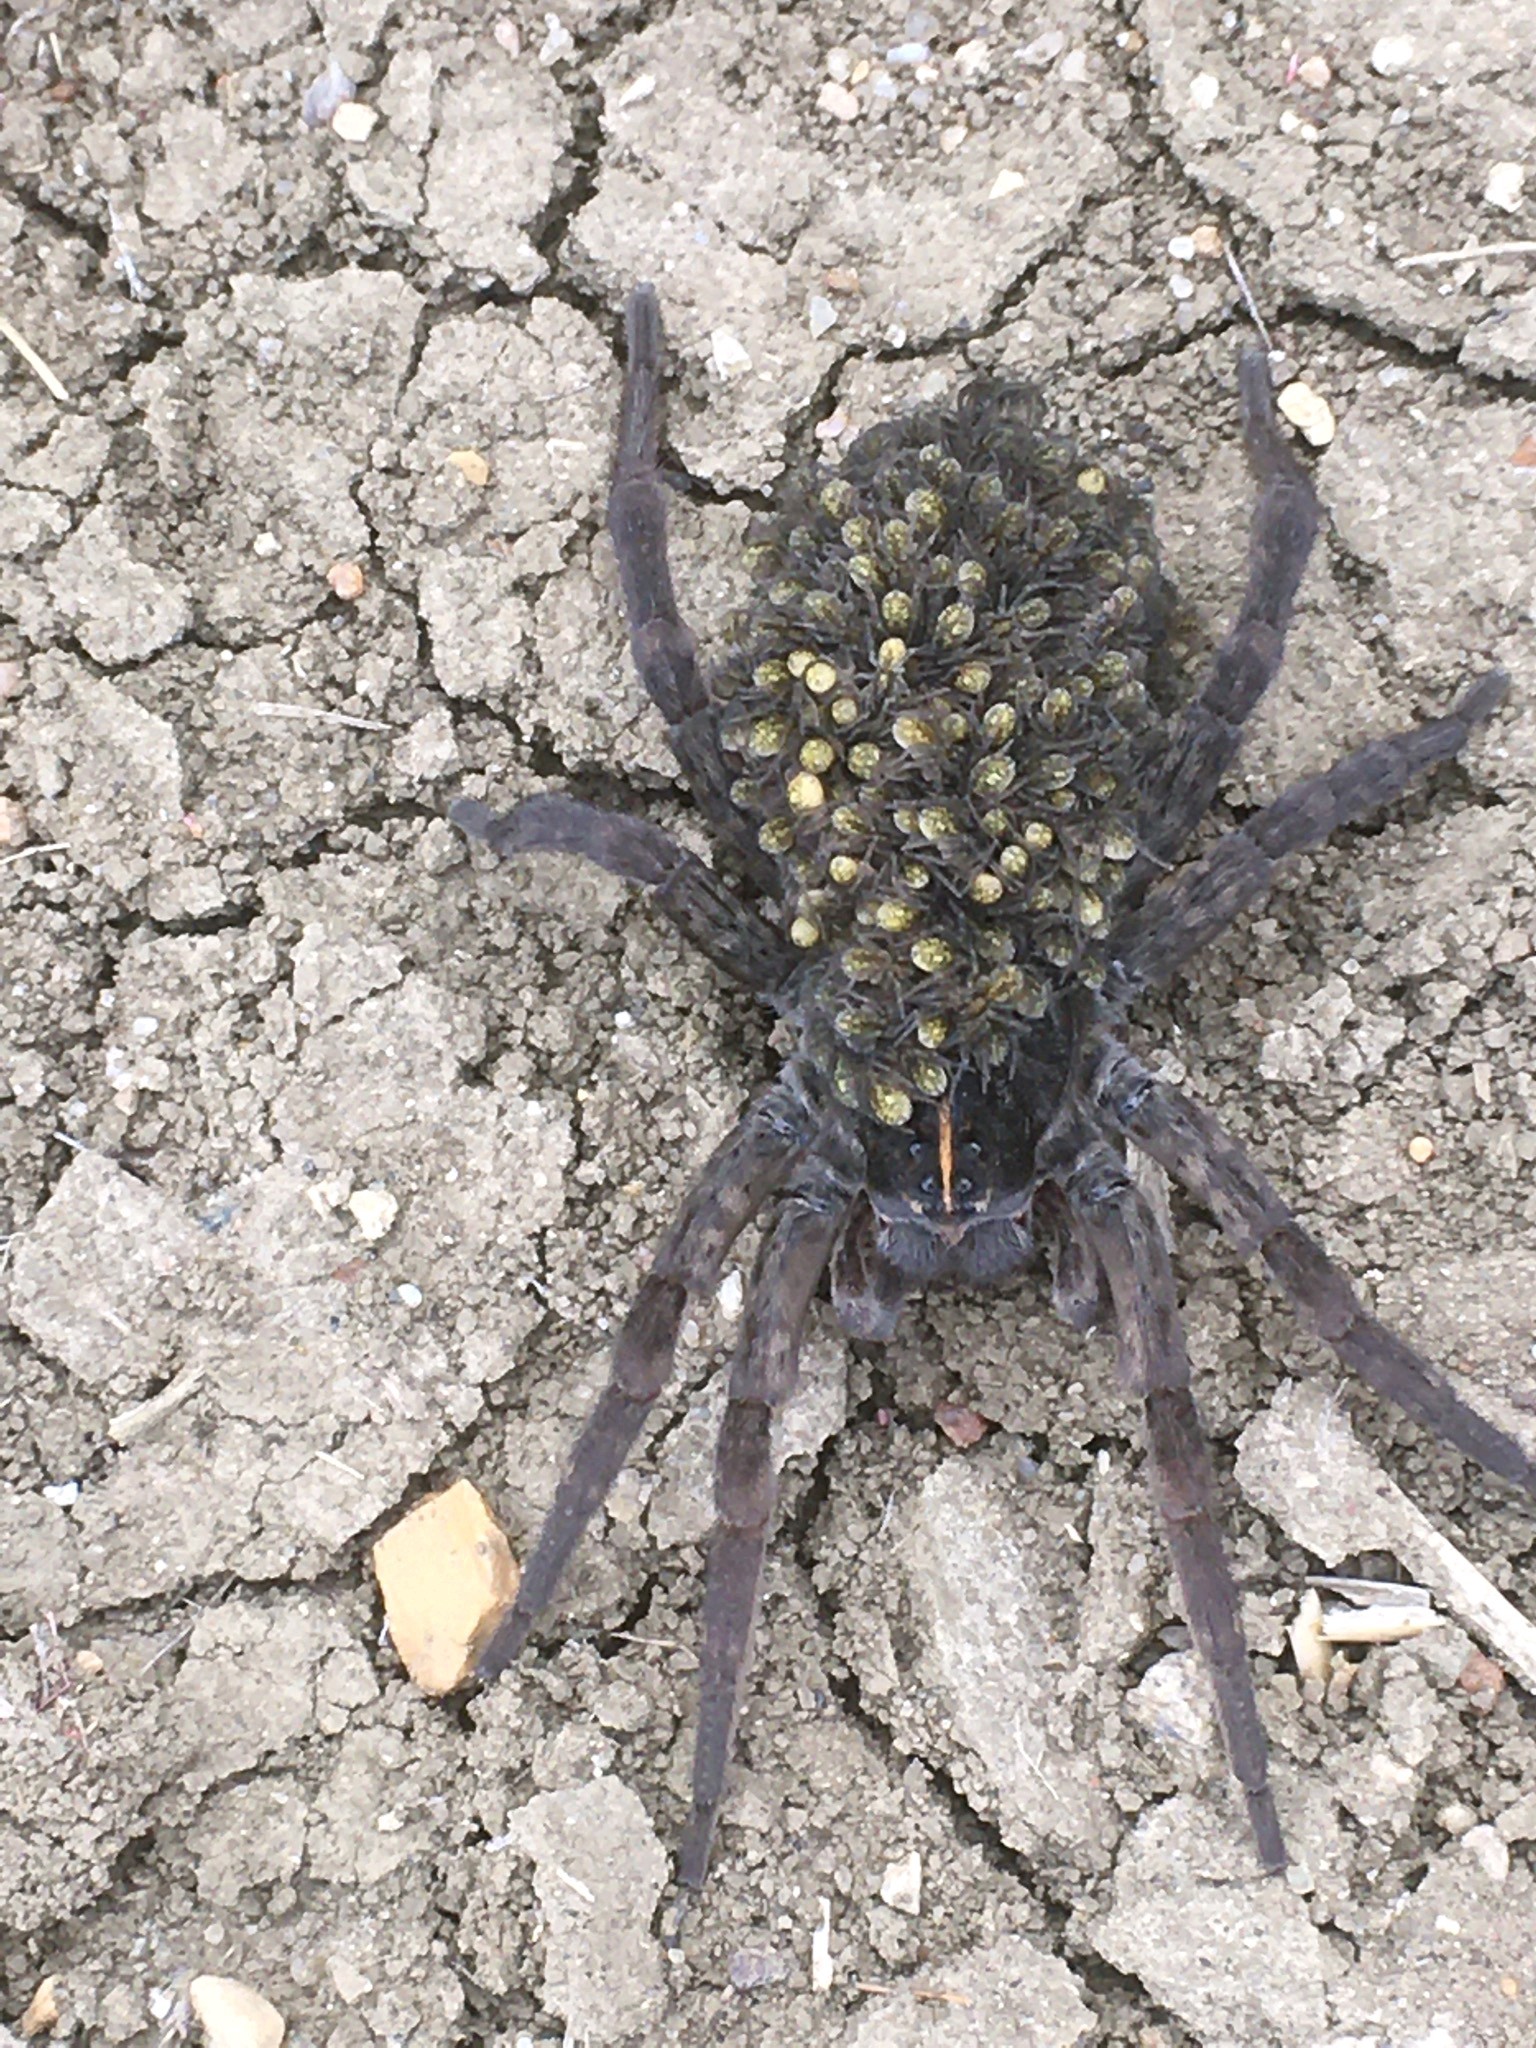 Wolf spider with spiderlings on its back